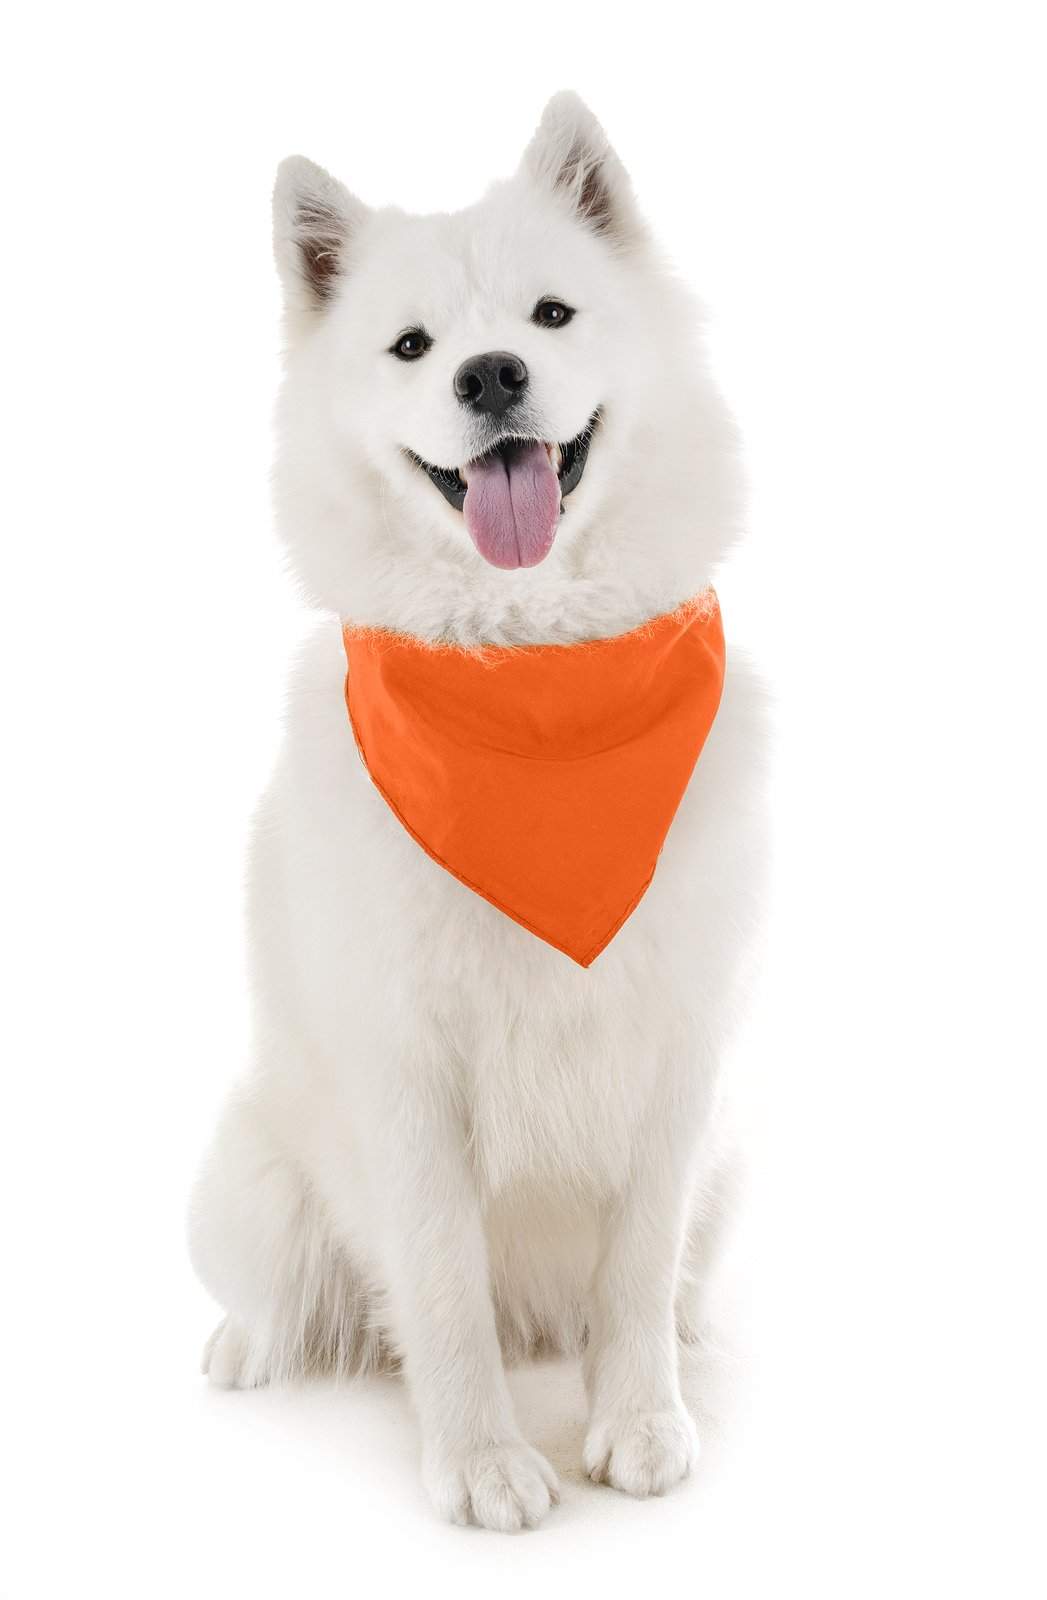 Mechaly Dog Plain Cotton Bandanas - 3 Pack - Scarf Triangle Bibs for Small & Large Puppies, Dogs and Cats